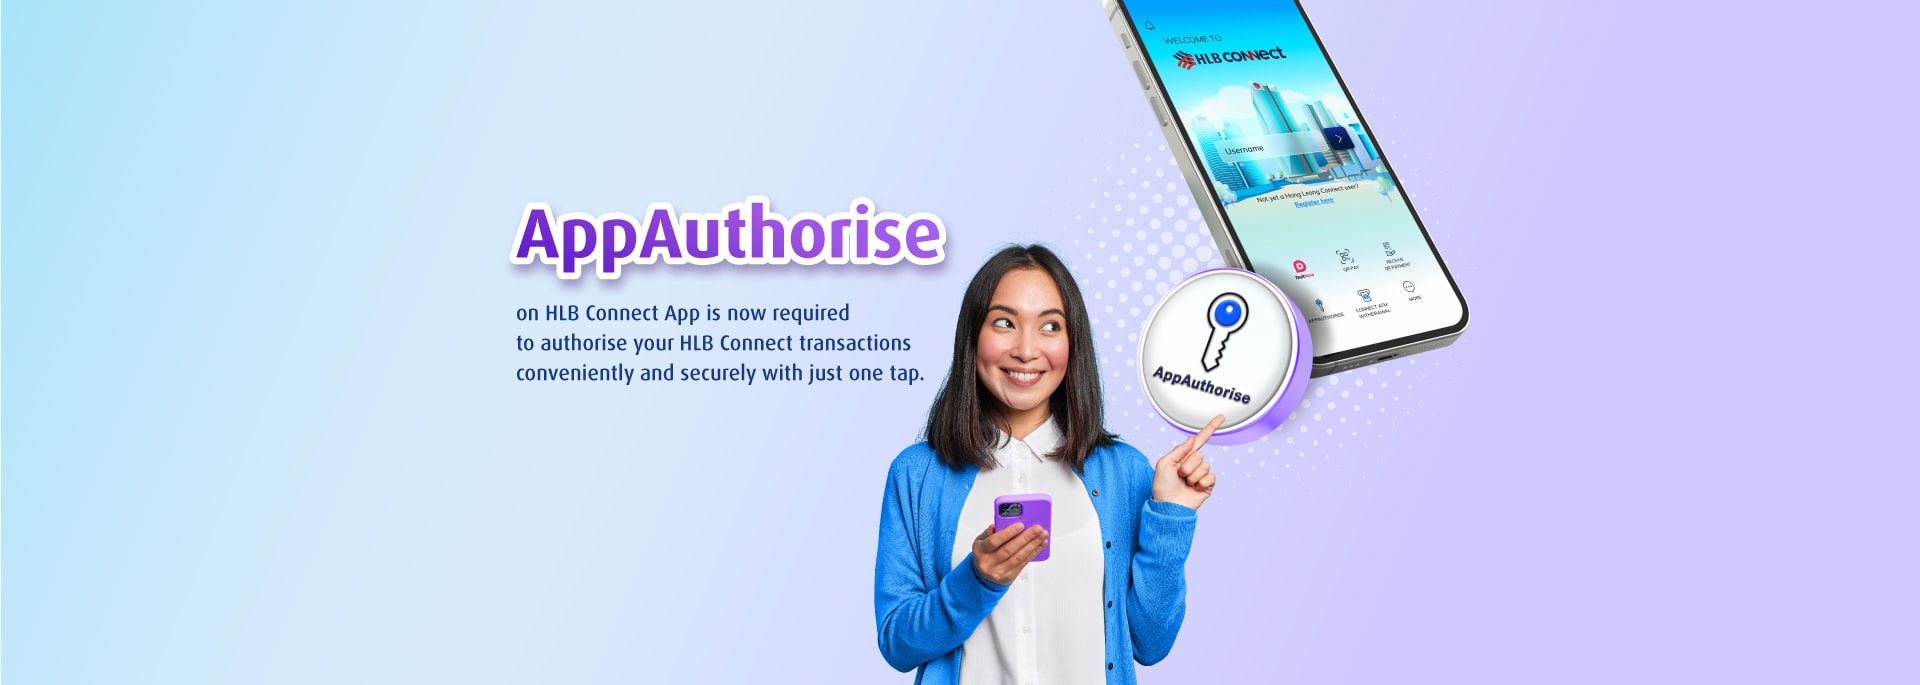 AppAuthorise - HLB Connect